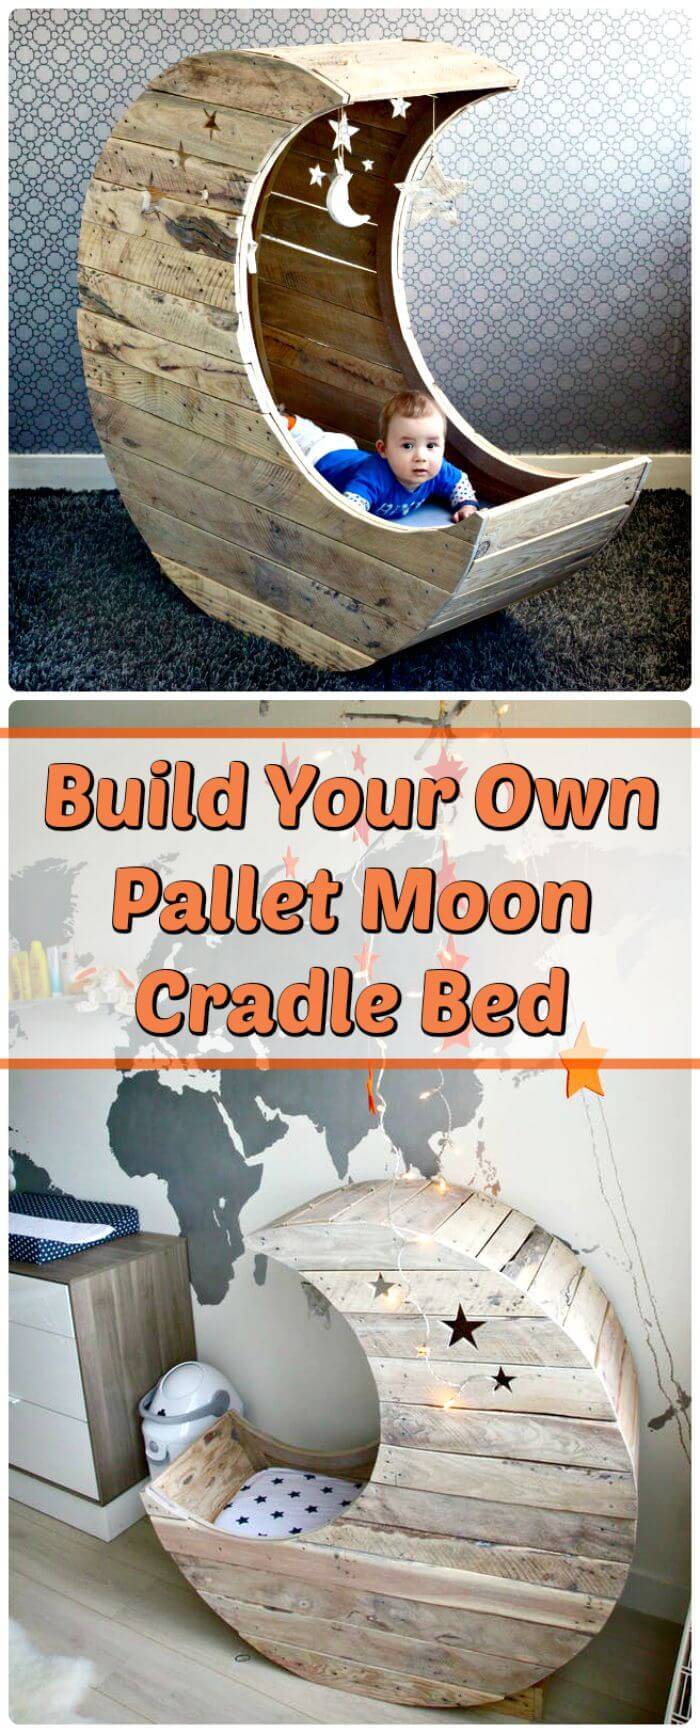 DIY Pallet Moon Cradle Bed Instructions - DIY Wooden Pallet Bed Projects